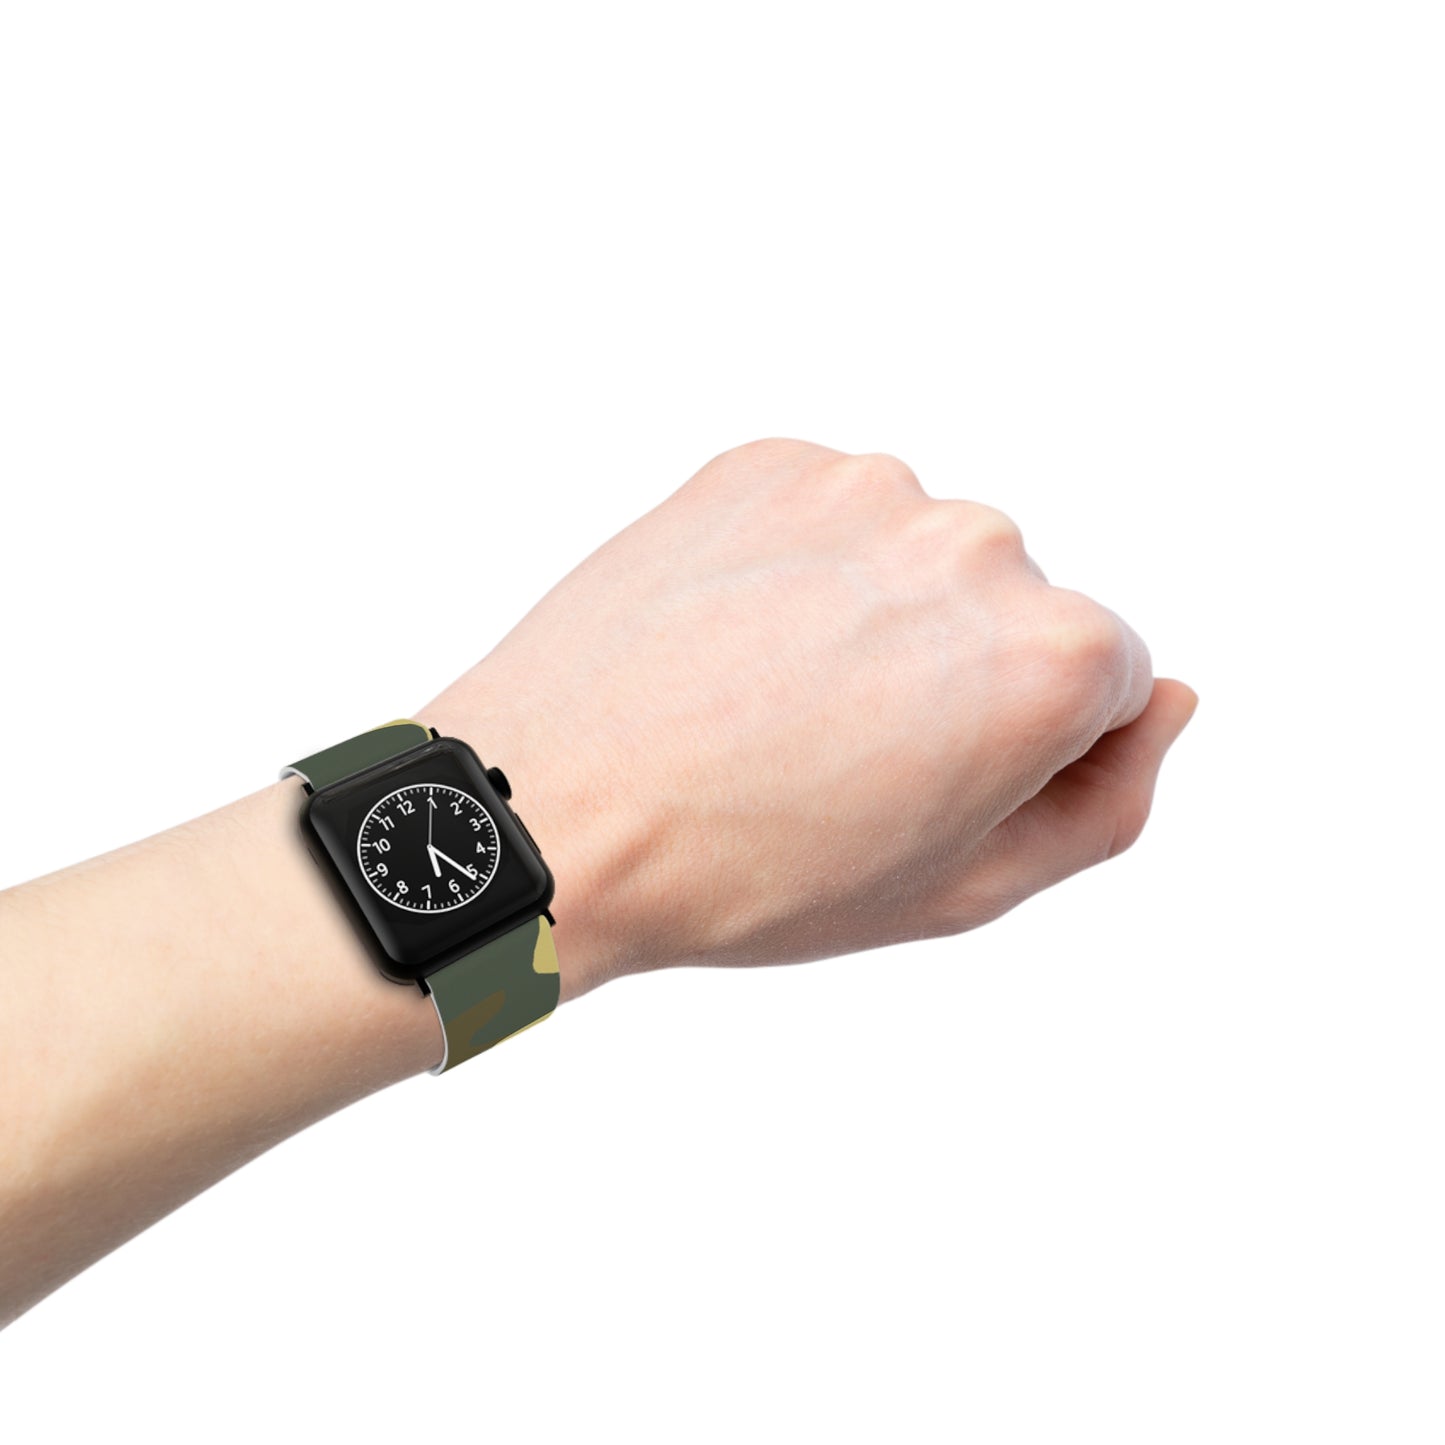 Ensign Ebba Torgesson - Camouflage Apple Wrist Watch Band